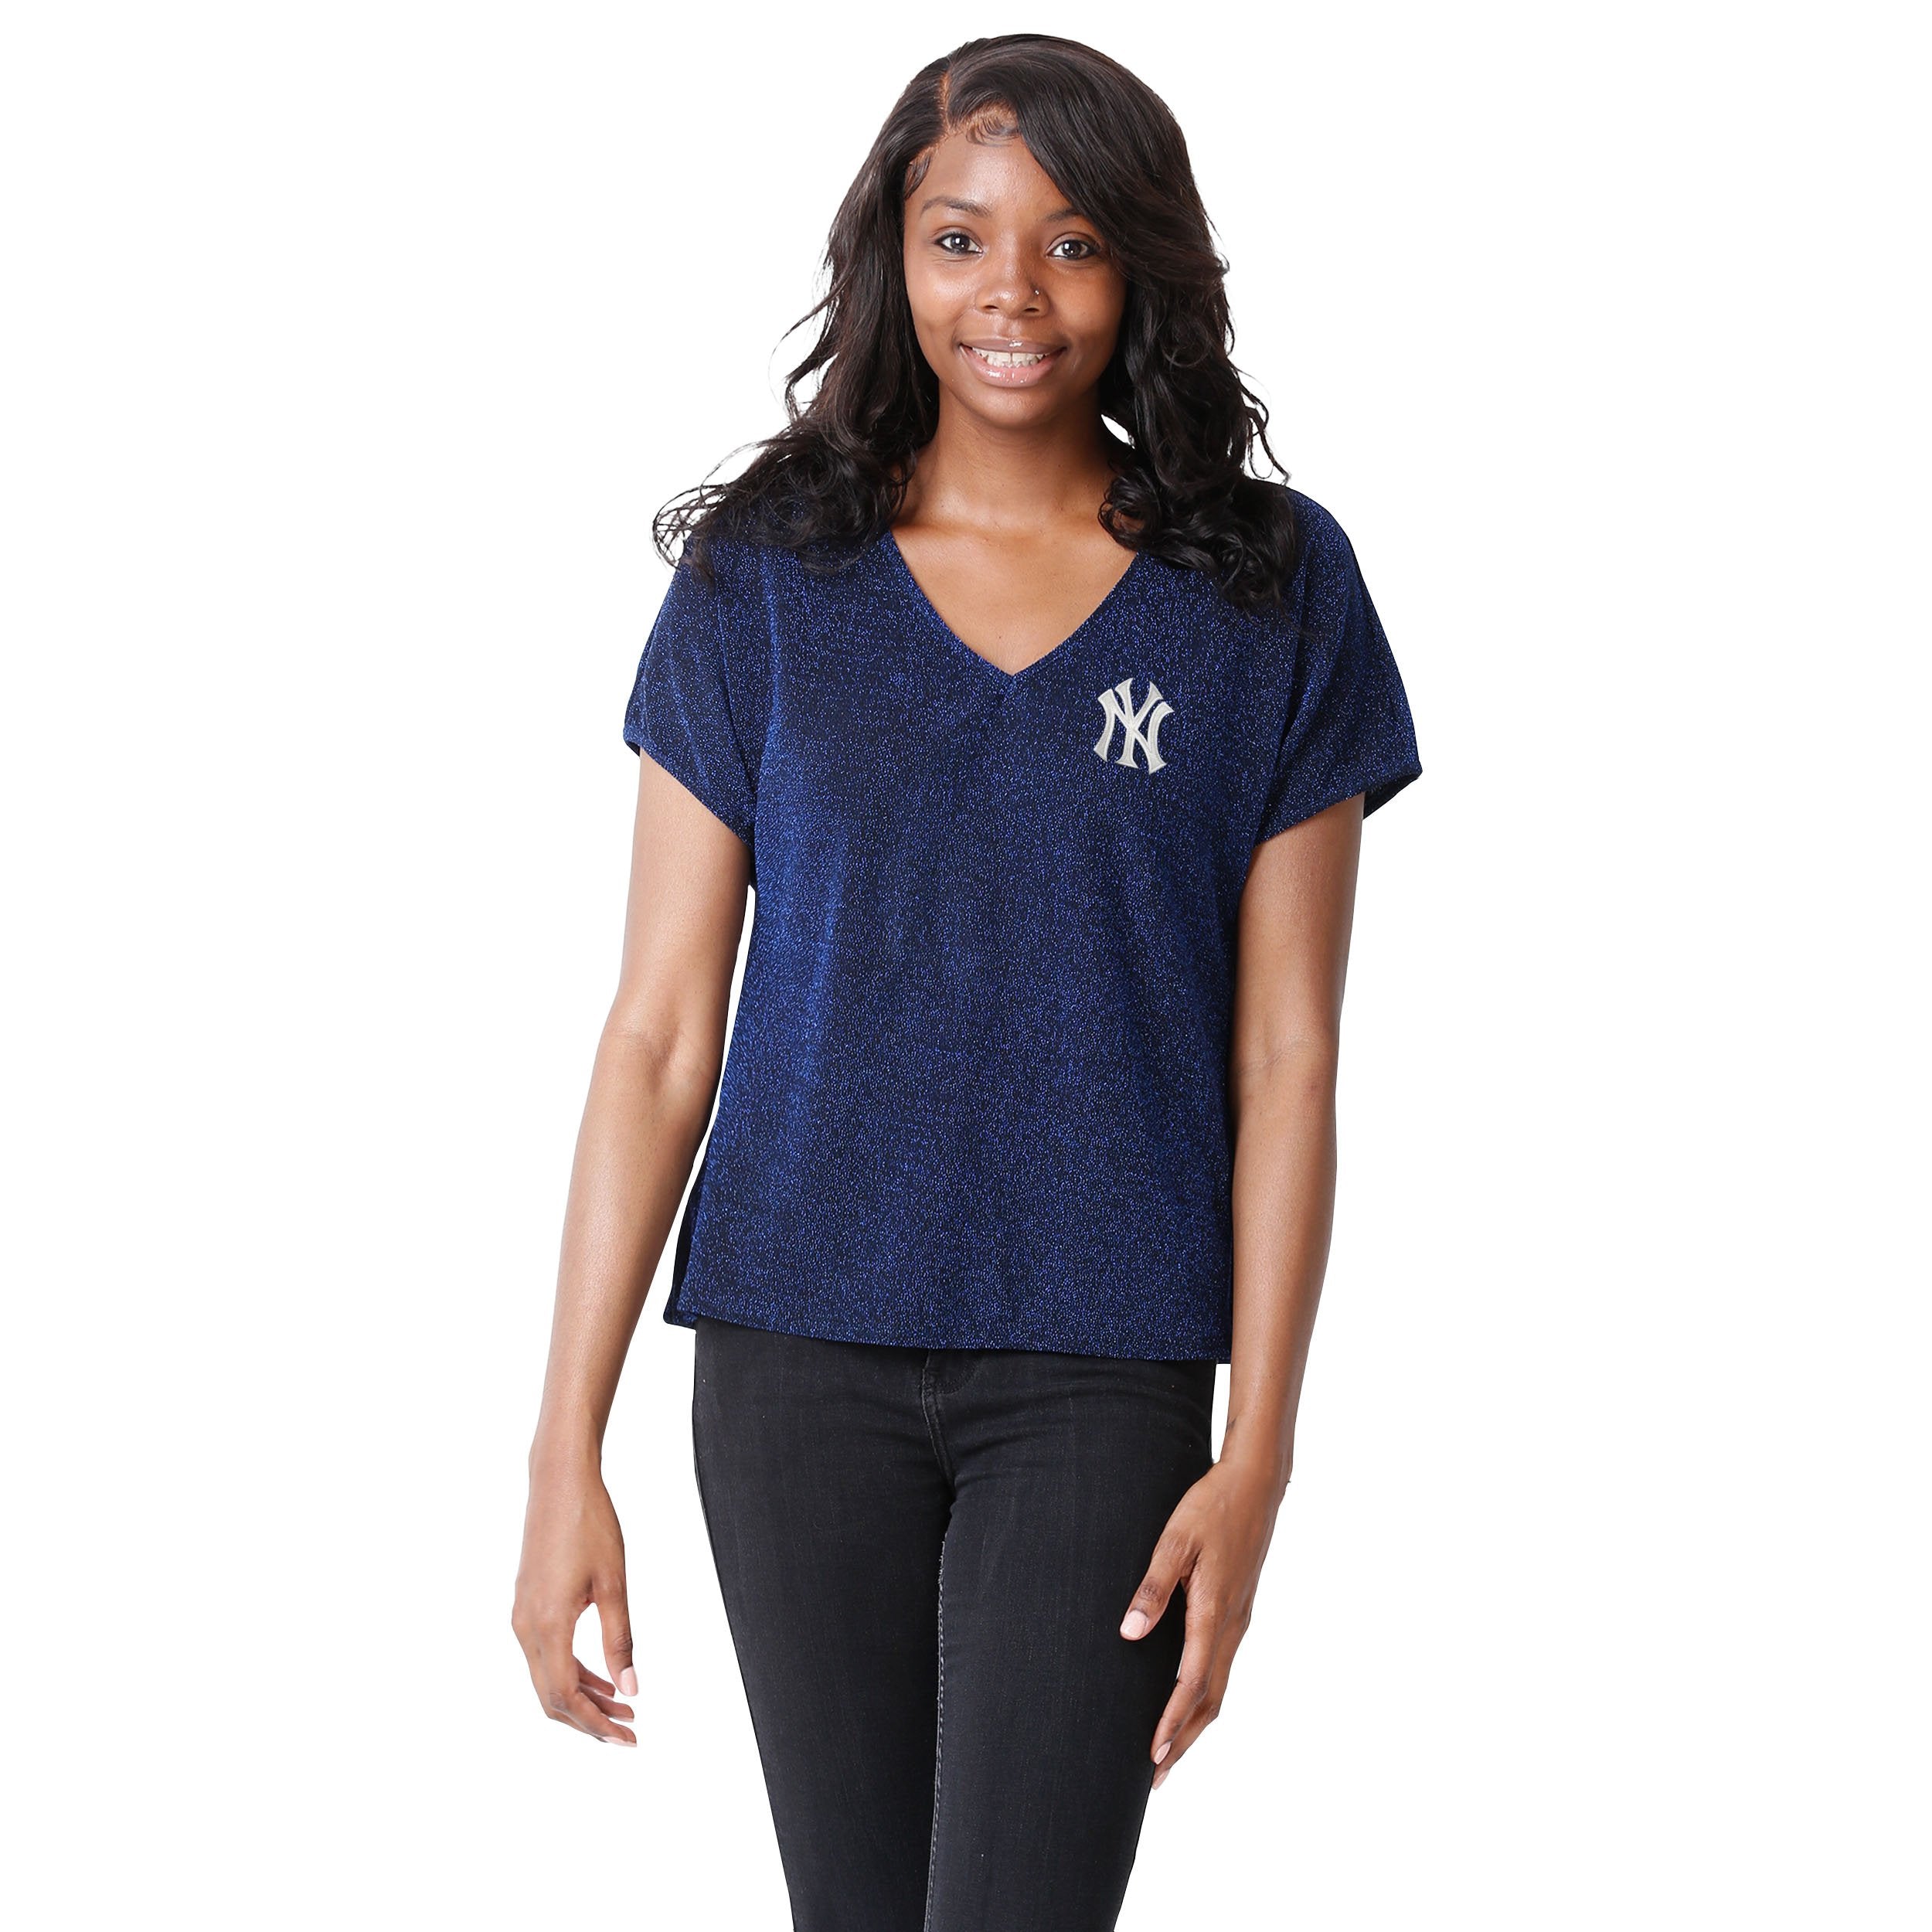 yankees outfit women